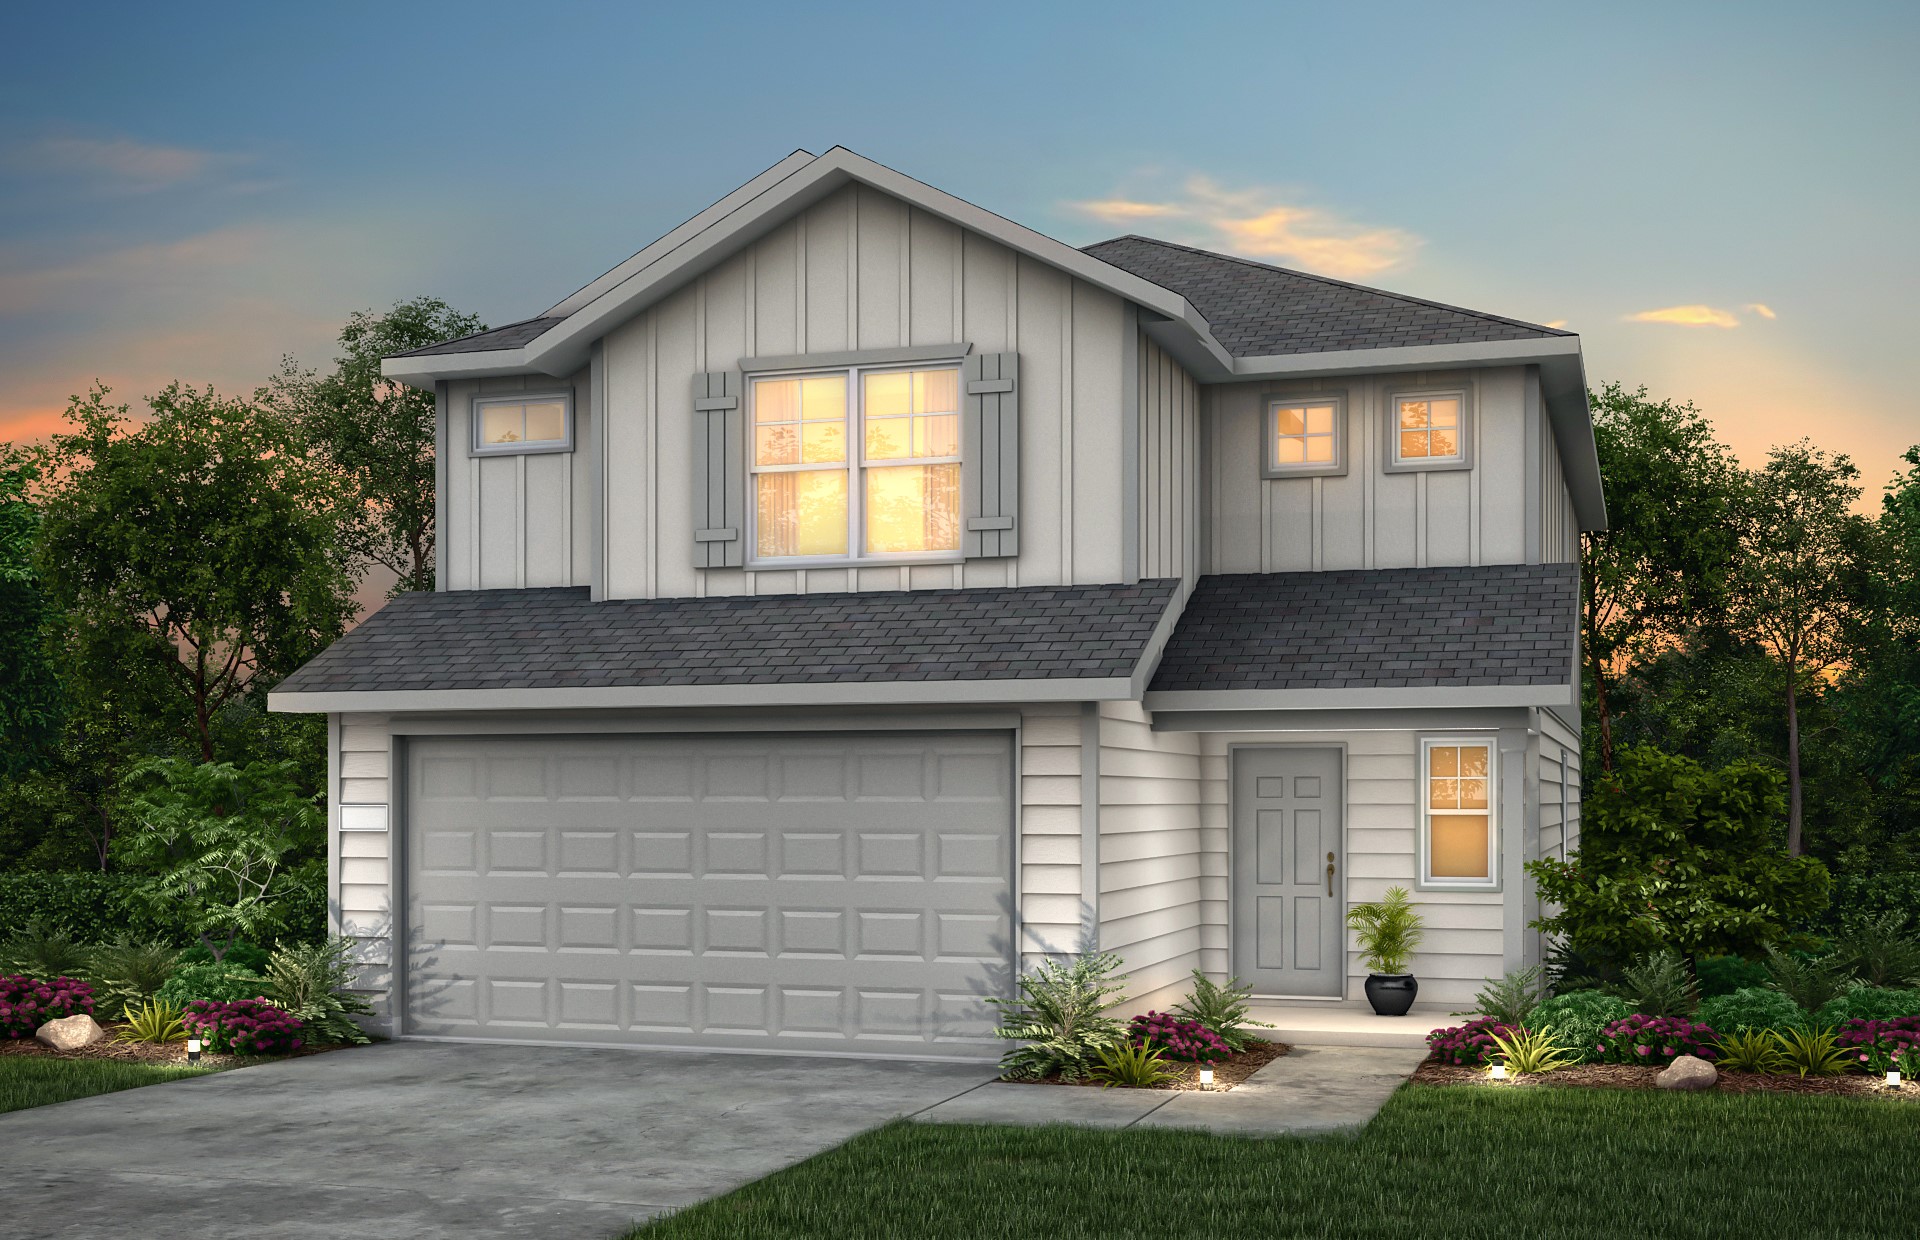 Rendering is representative of the exterior of the home upon completion.